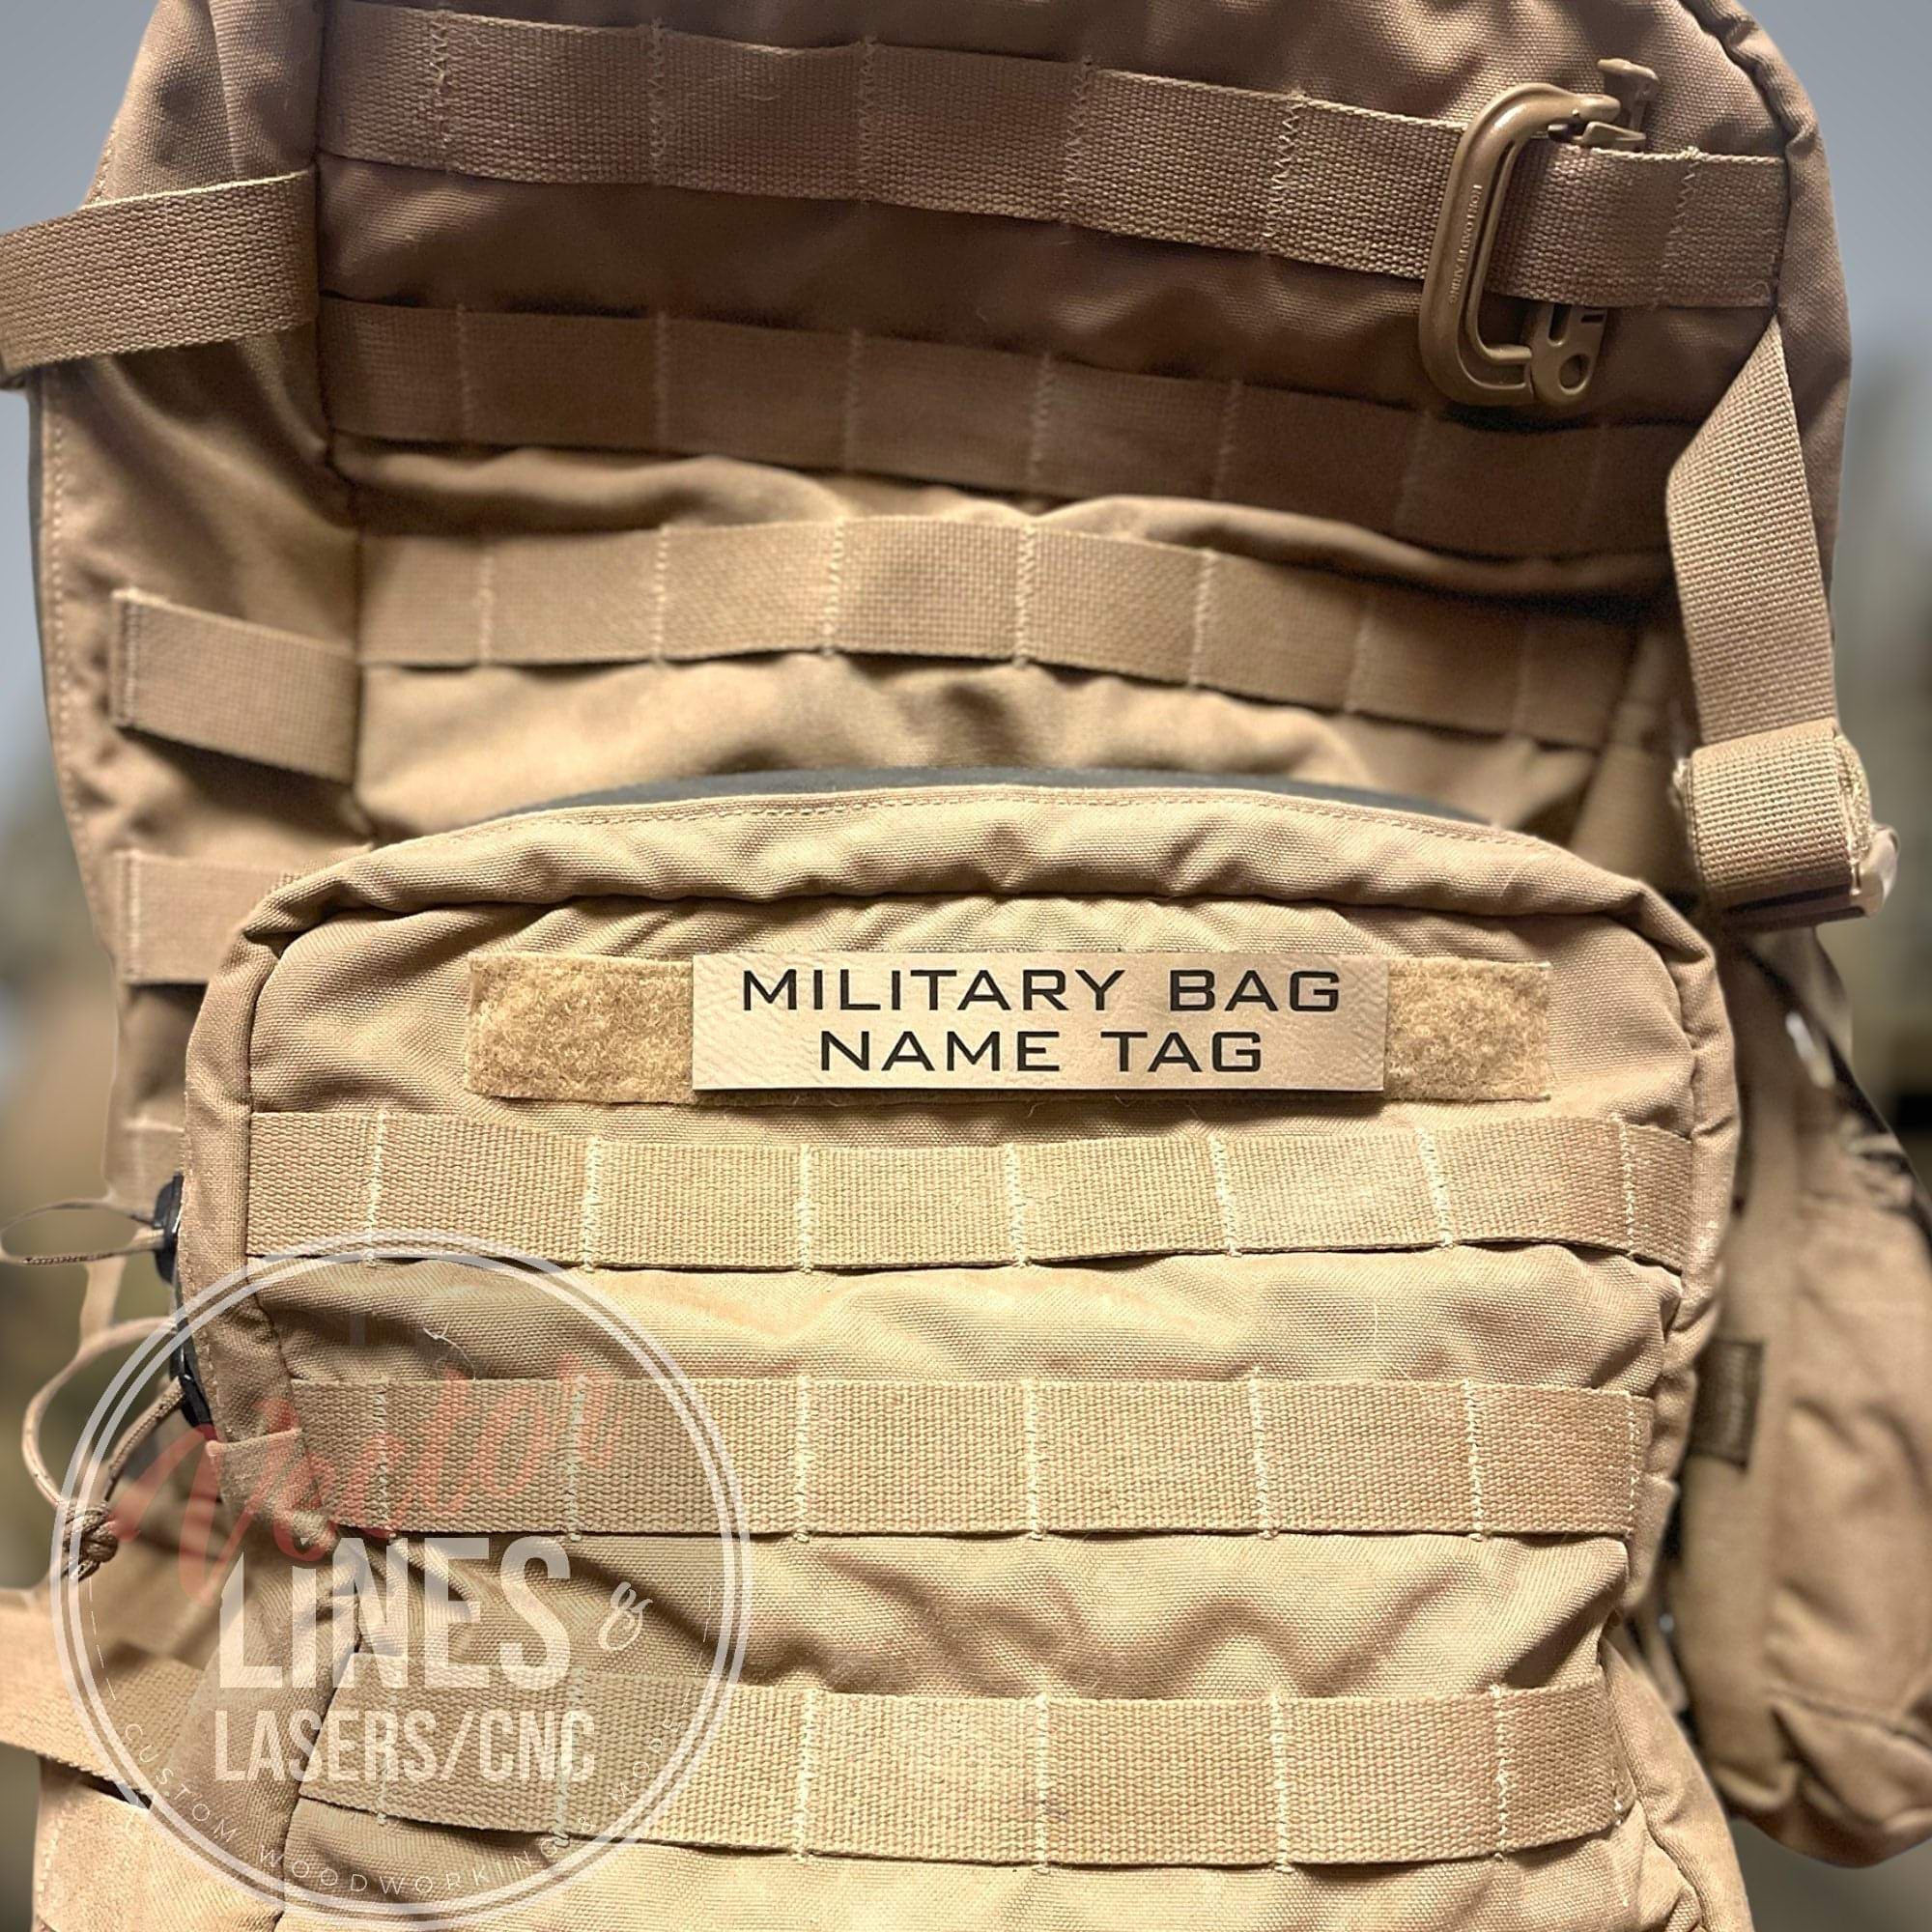 Customized Military Backpack Name Tapes - Removable